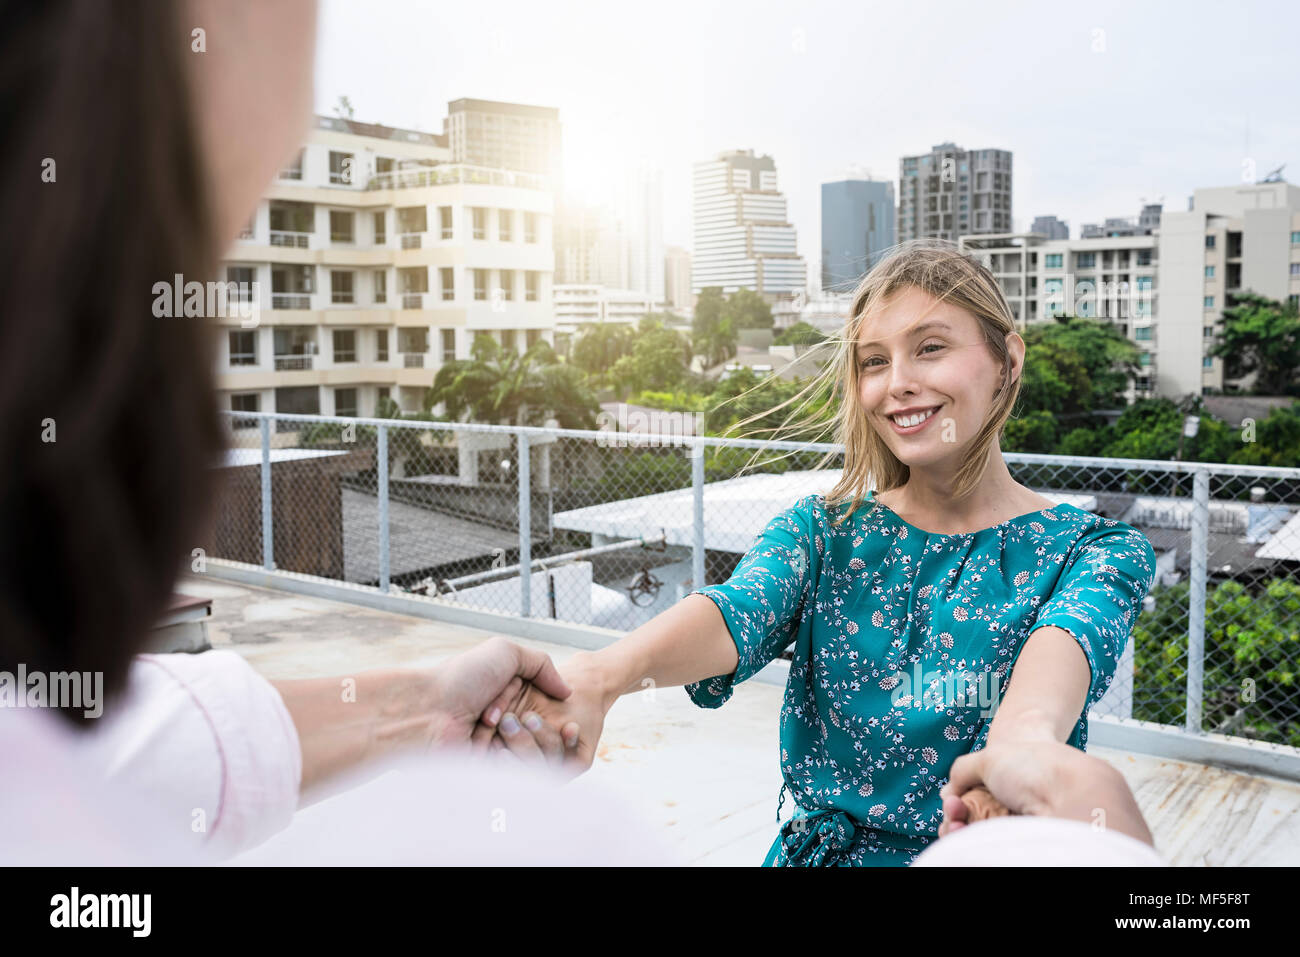 Young woman holding hands with boyfriend on rooftop Banque D'Images